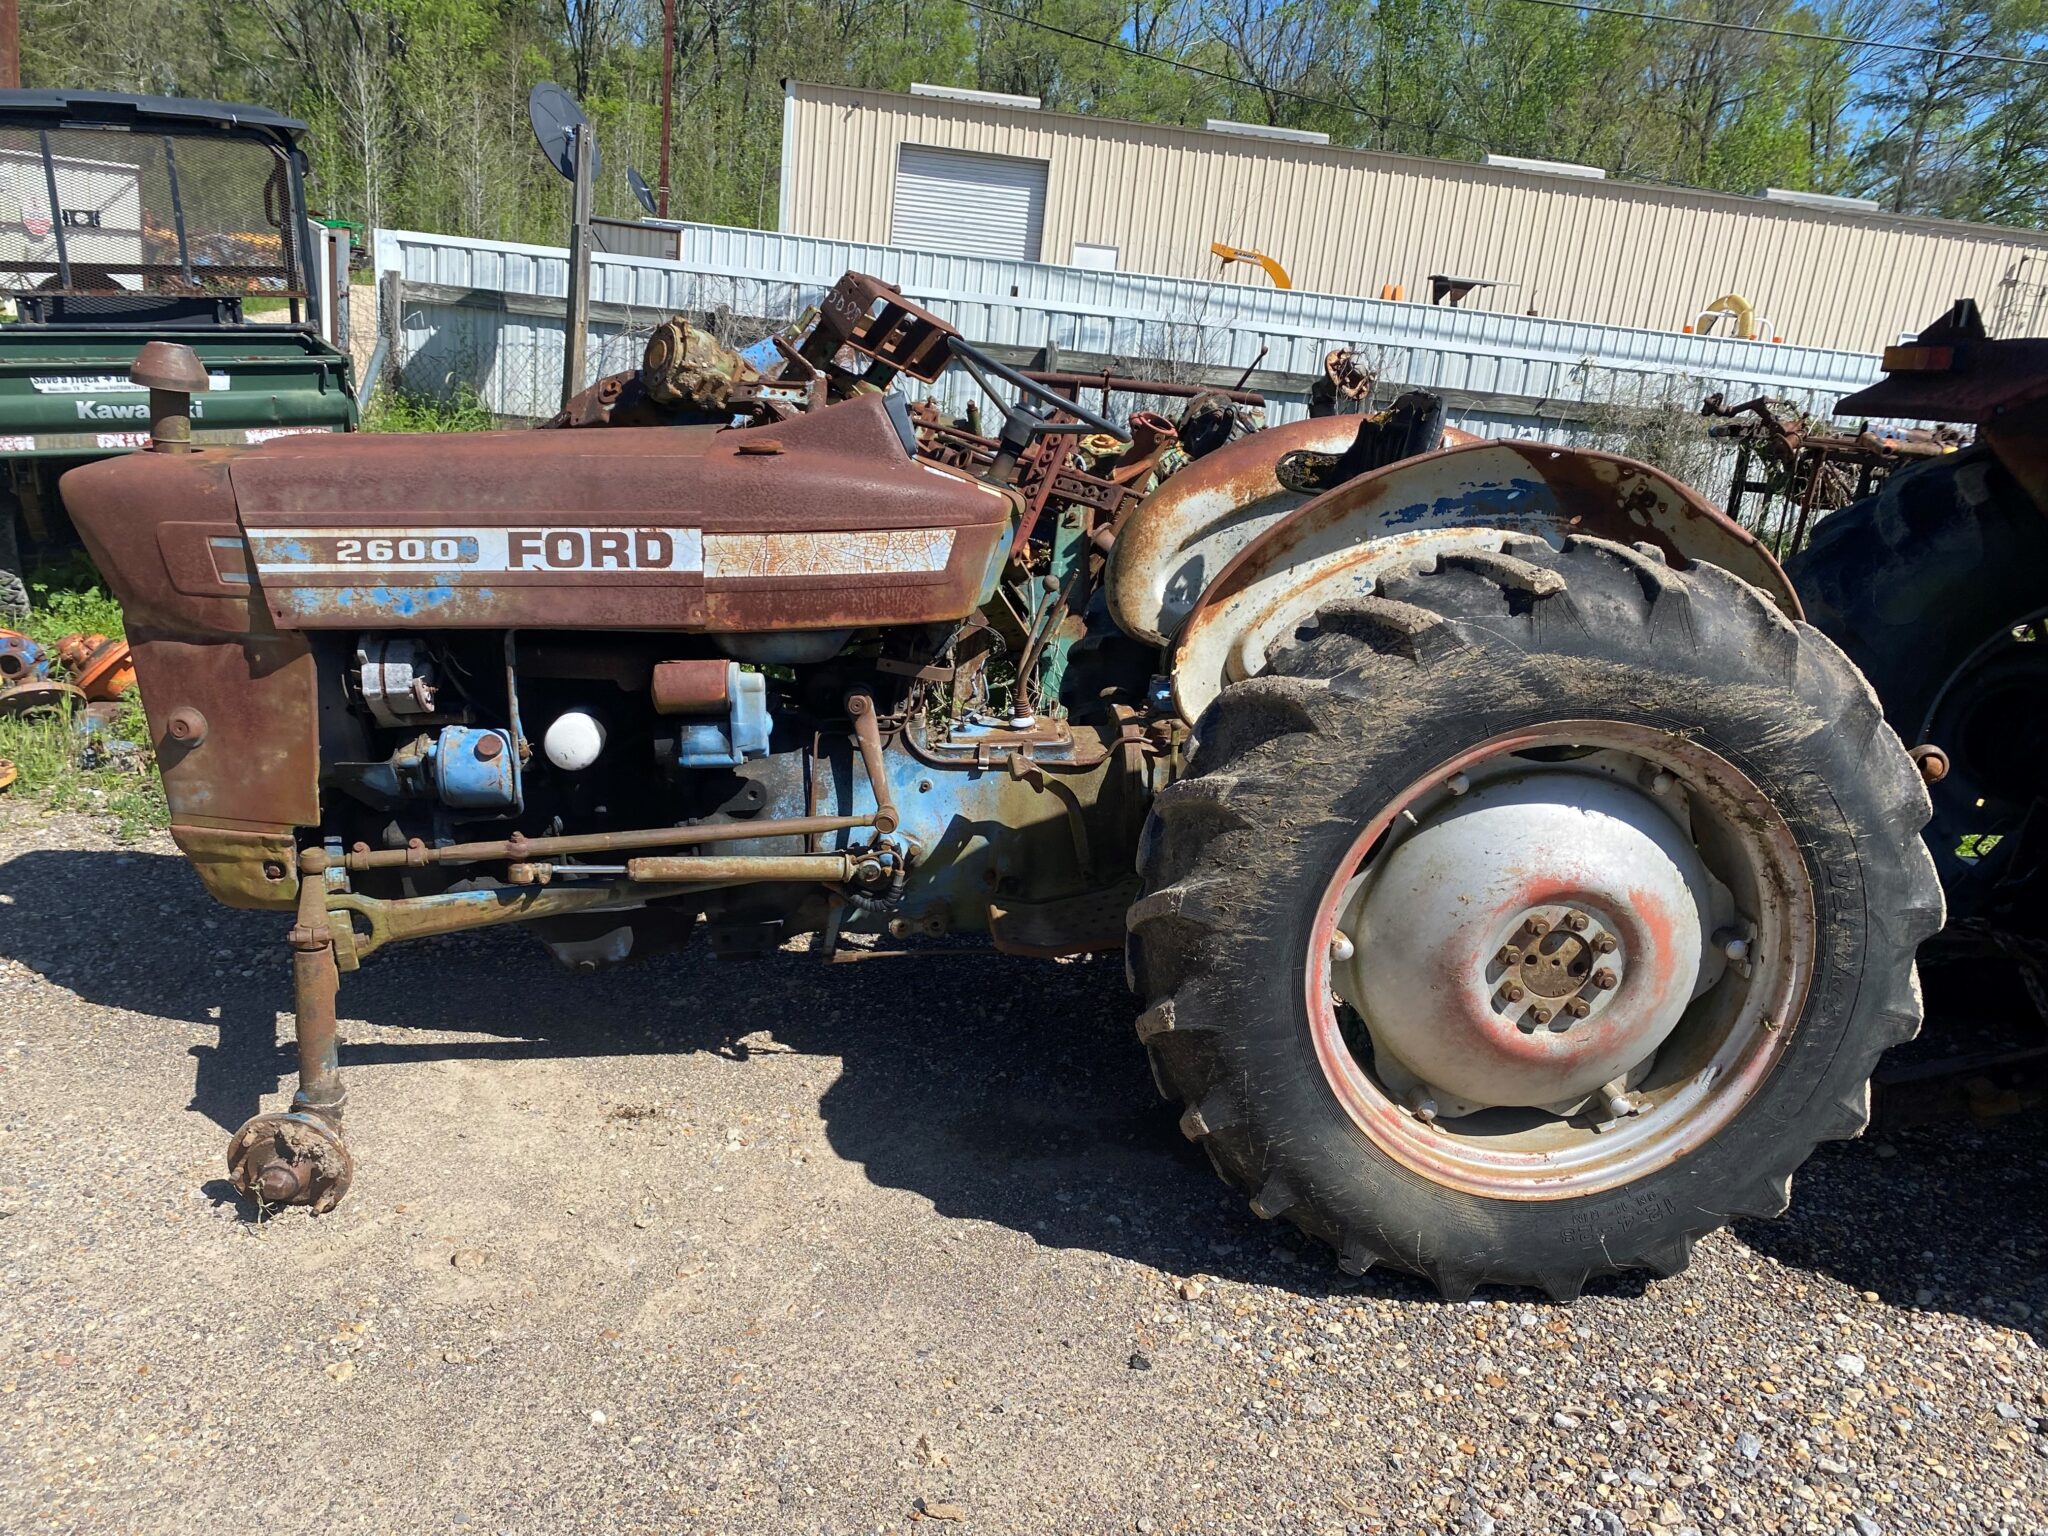 Ford 2600 in for Parts